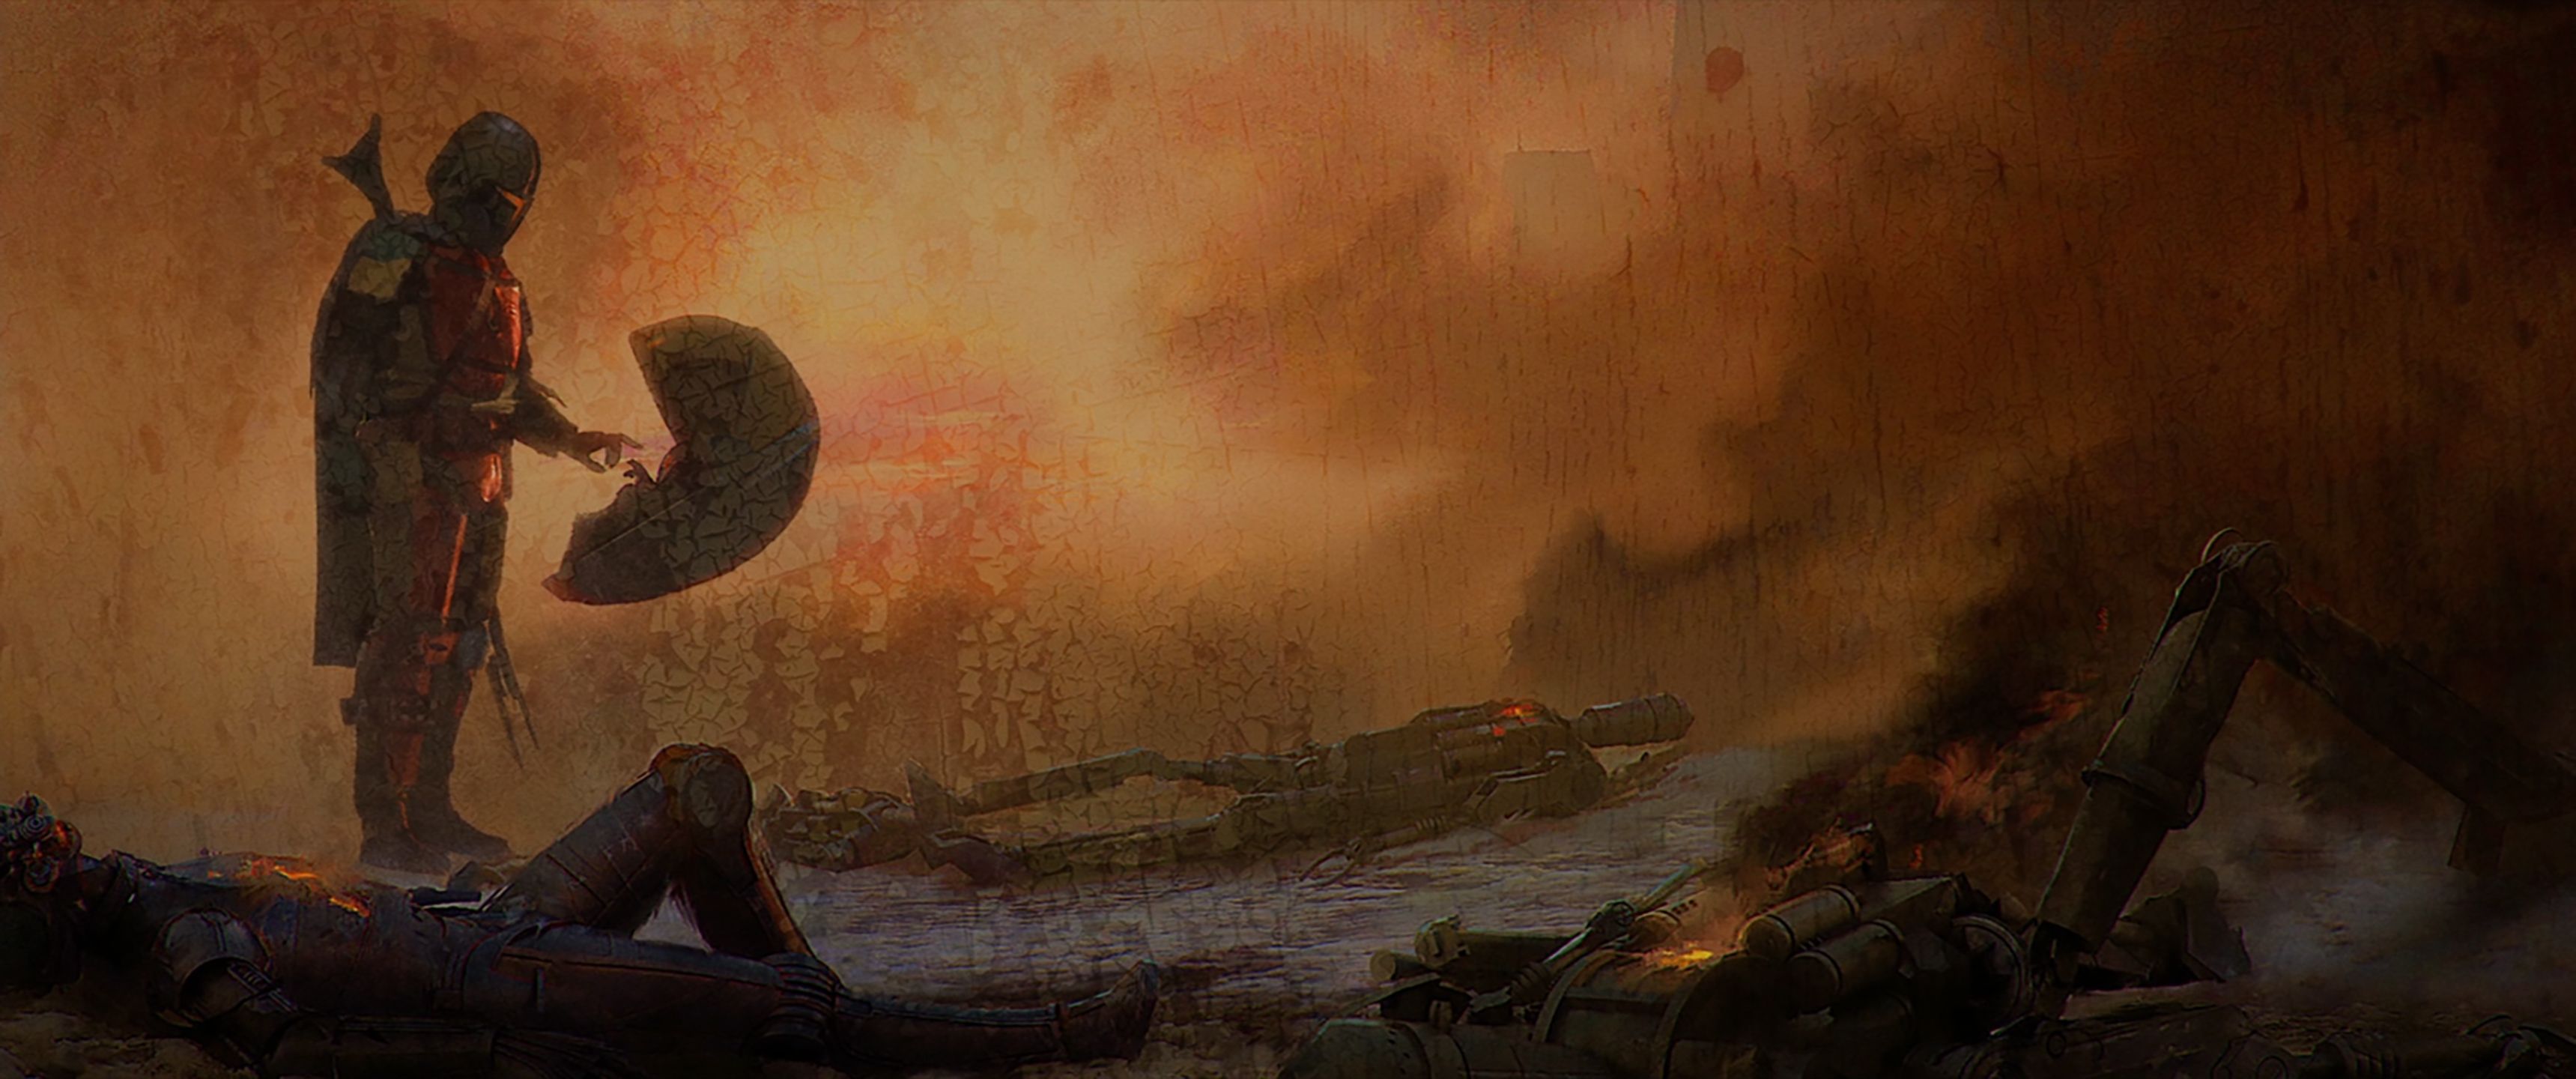 Desktop background from the end credits of The Mandalorian art credits @Disney